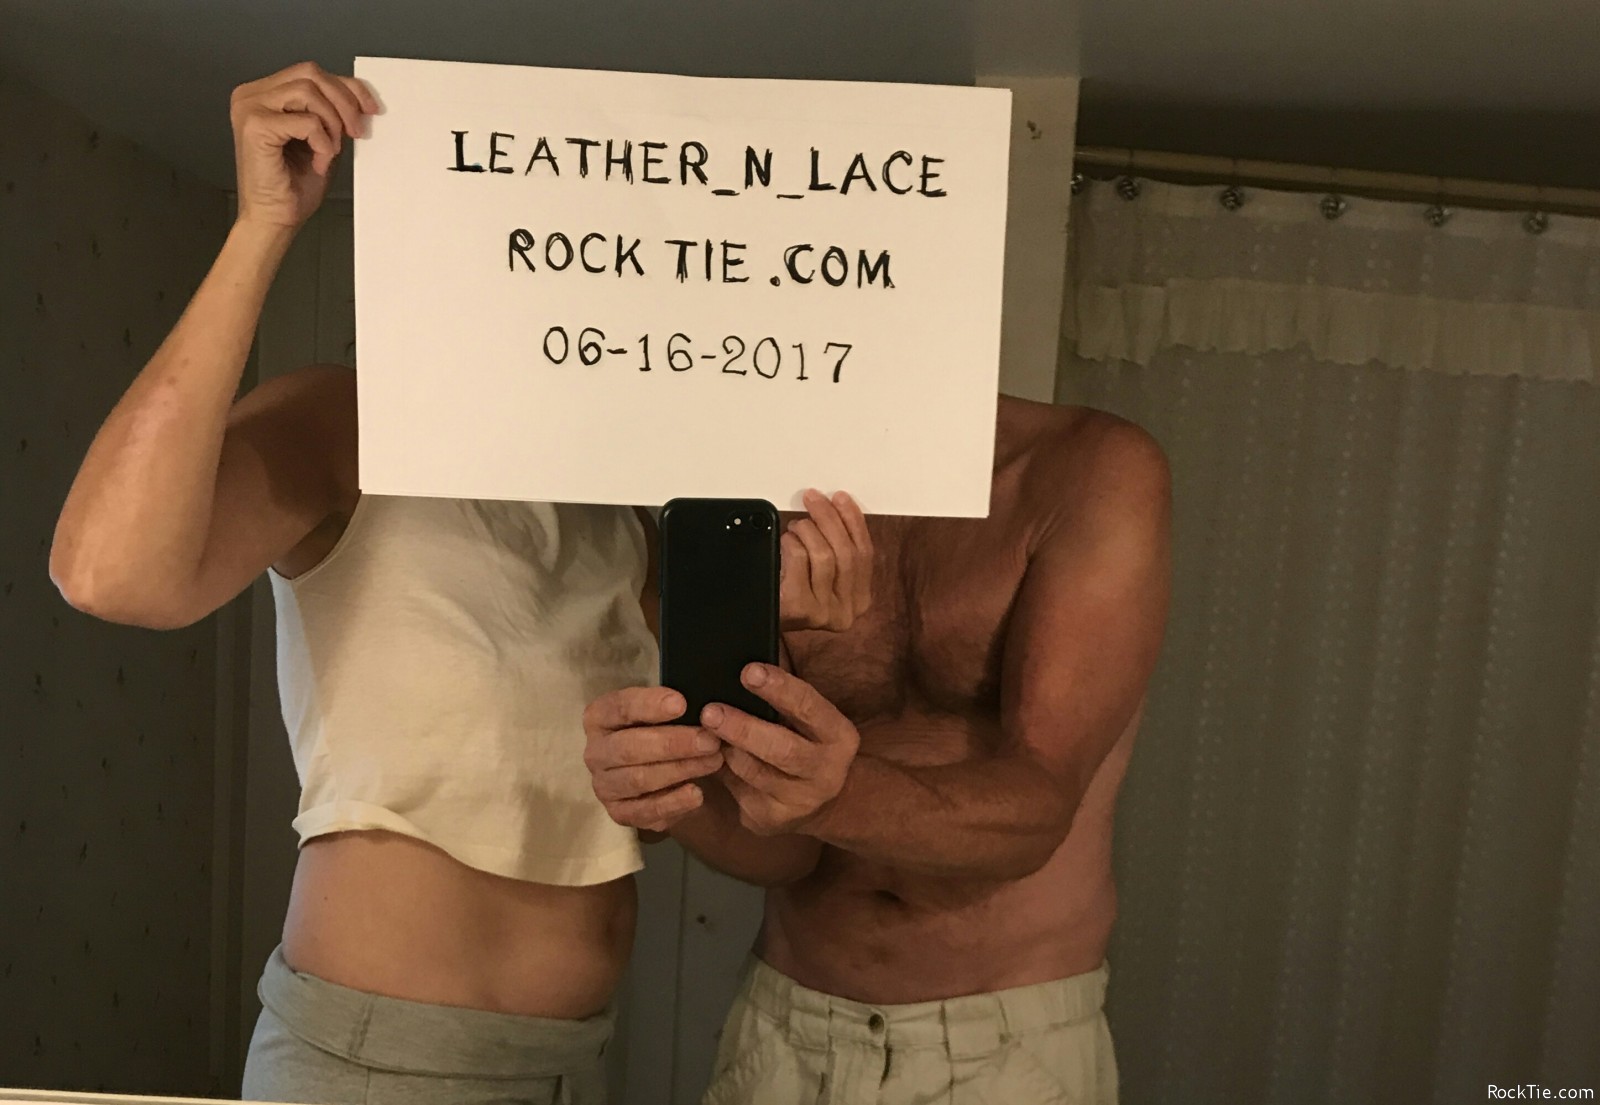 Swingers Hotwife Cuckold Syracuse New York - Leather_n_lace